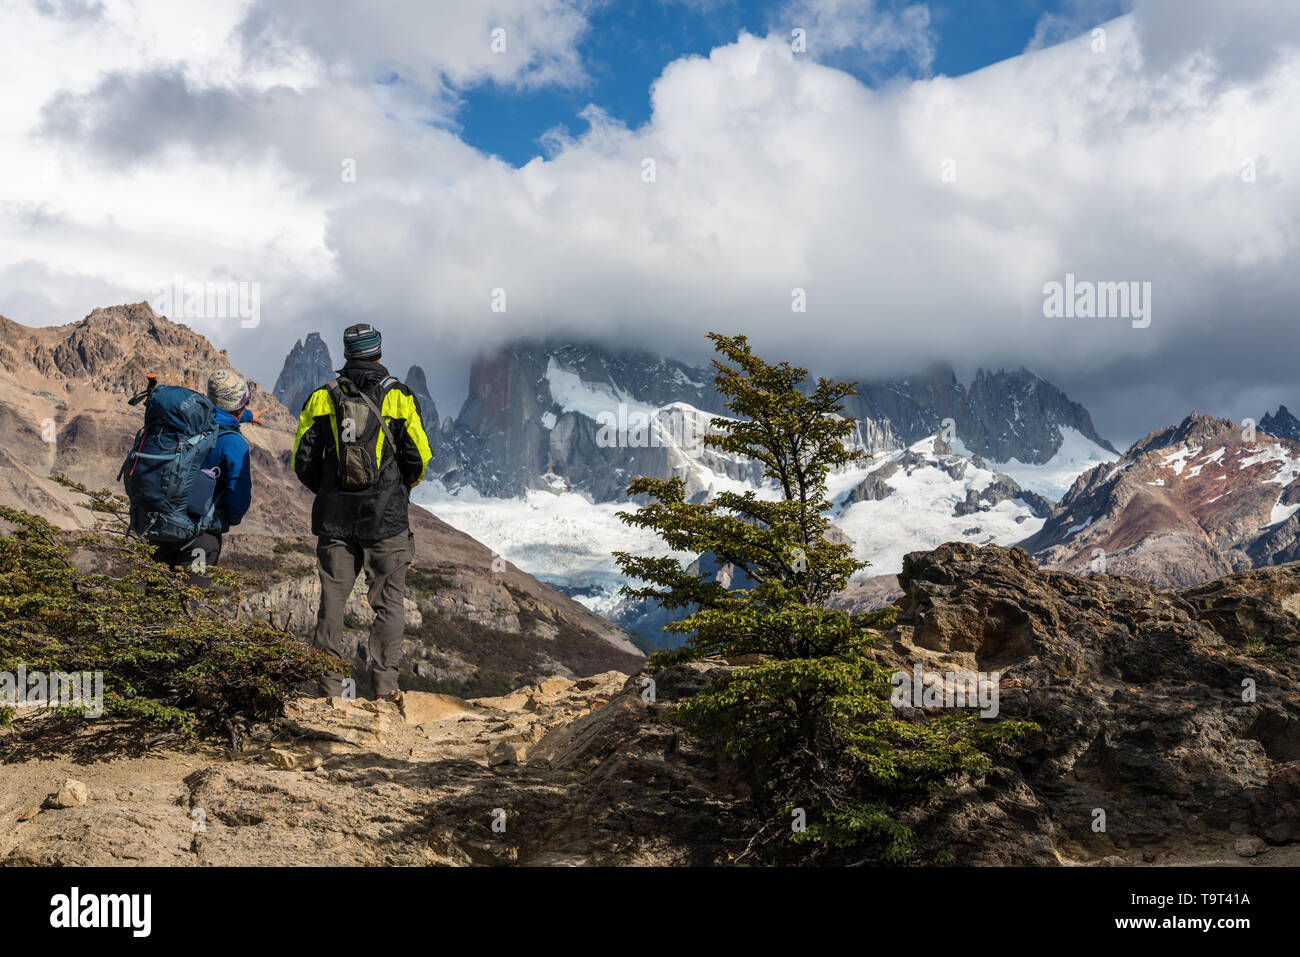 Two hikers view Mount FItz Roy in the clouds in Los Glaciares National ...